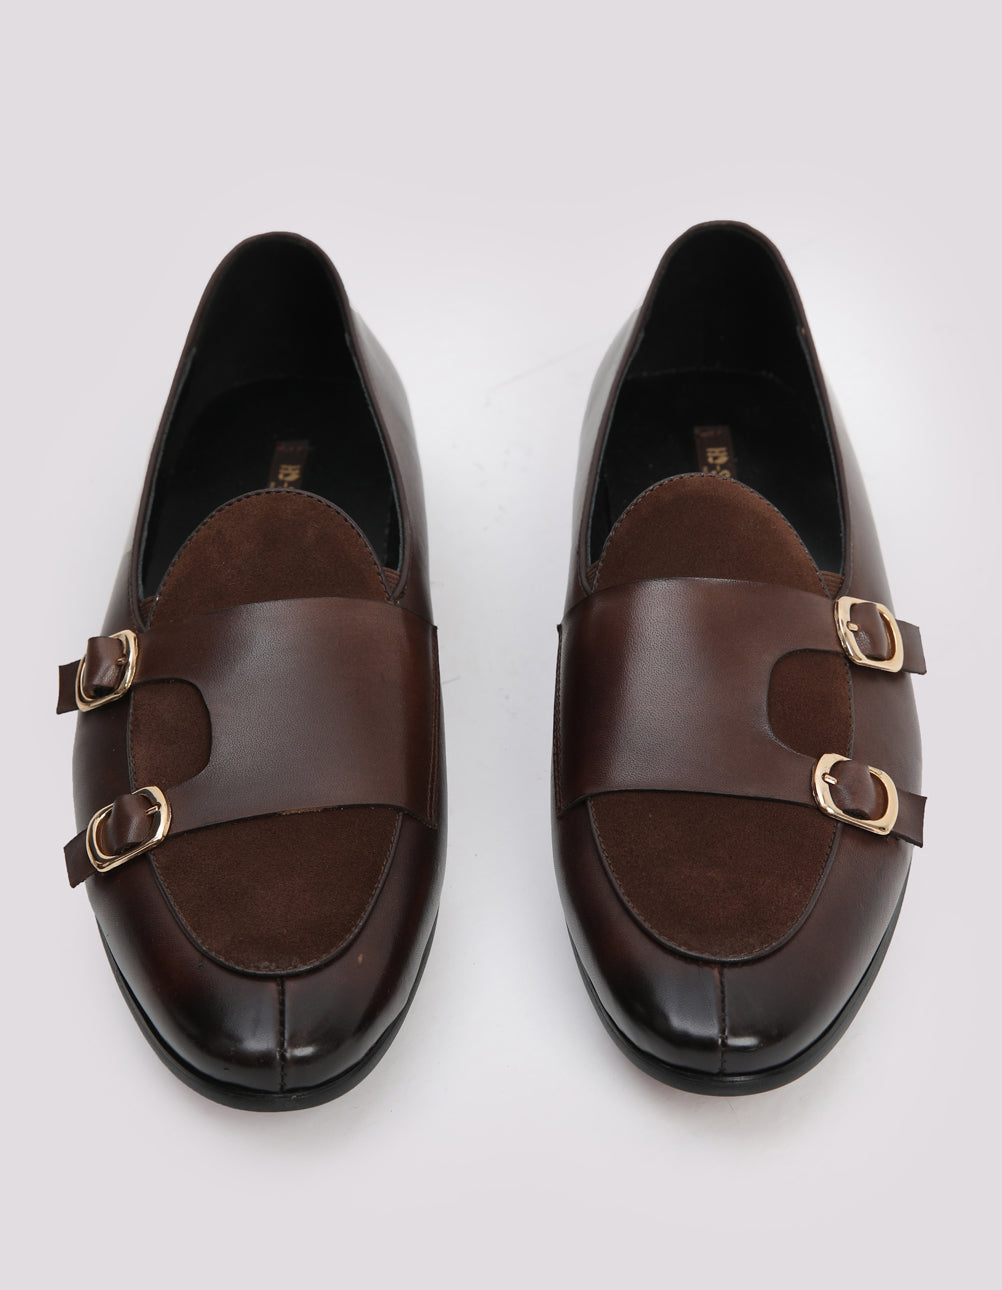 DOUBLE MONK LEATHER SHOES